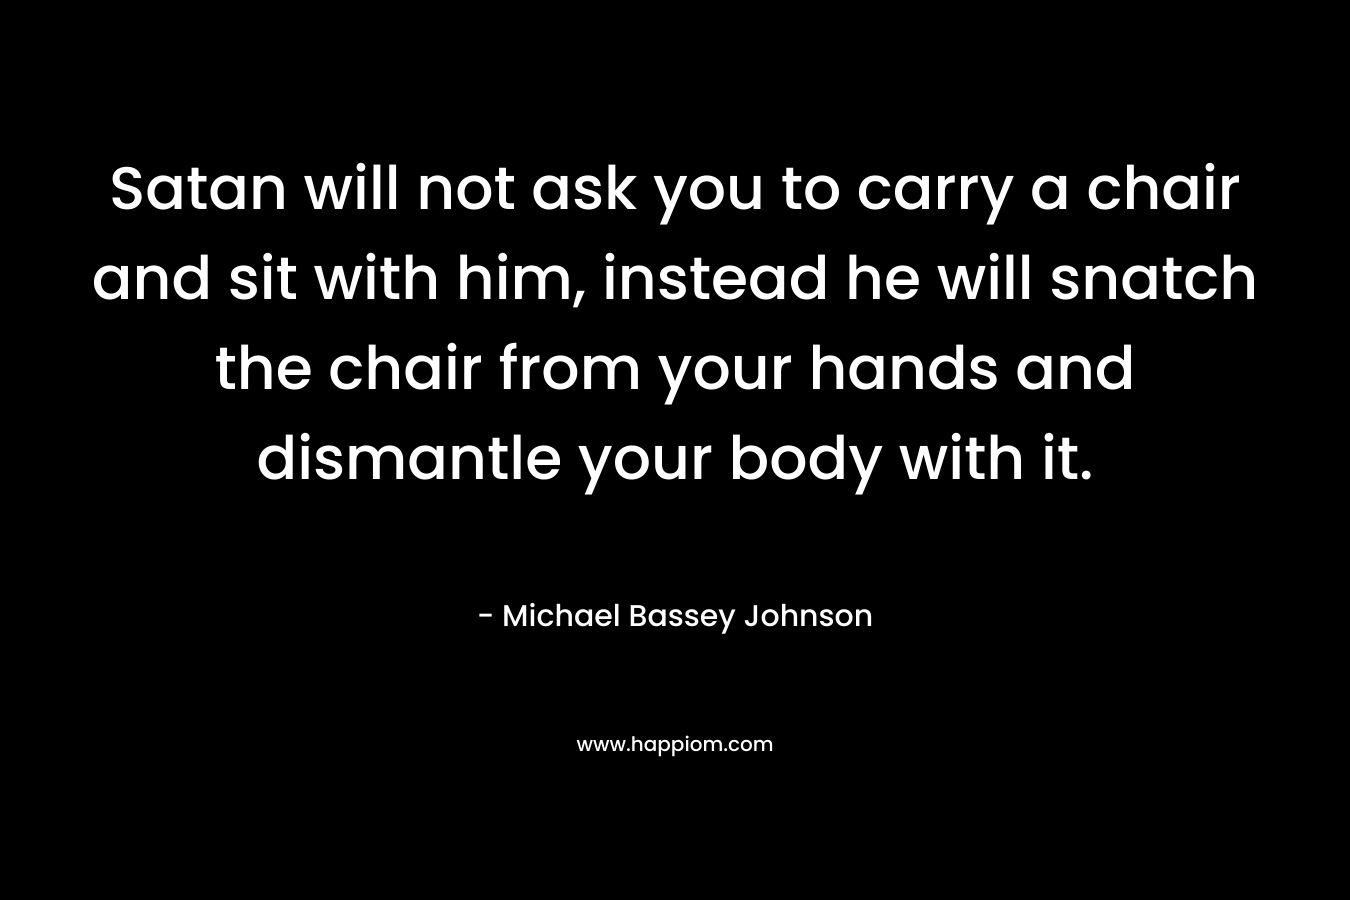 Satan will not ask you to carry a chair and sit with him, instead he will snatch the chair from your hands and dismantle your body with it. – Michael Bassey Johnson